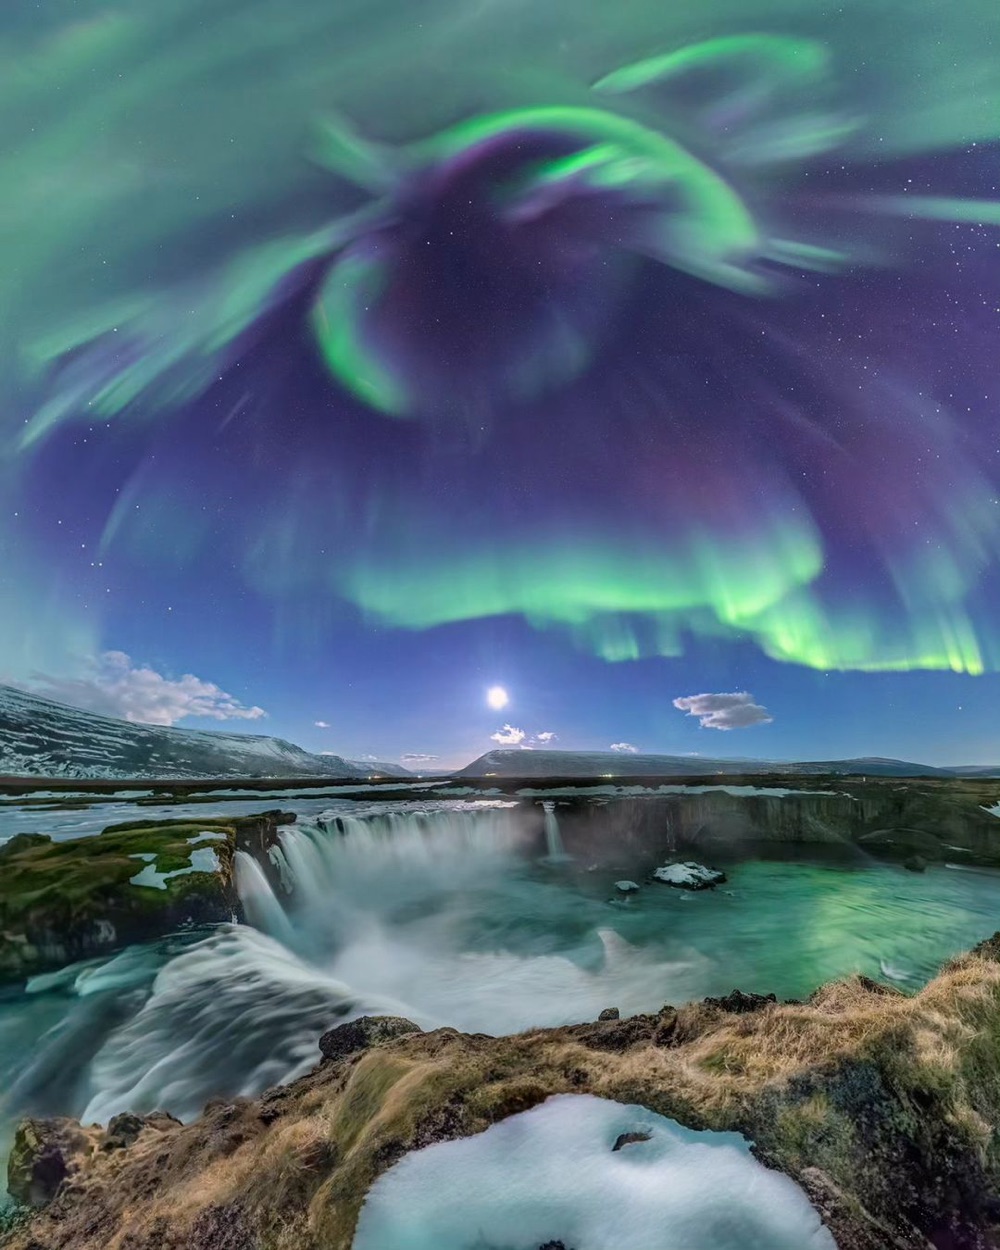 the aurora borealis in the sky over an Icelandic waterfall